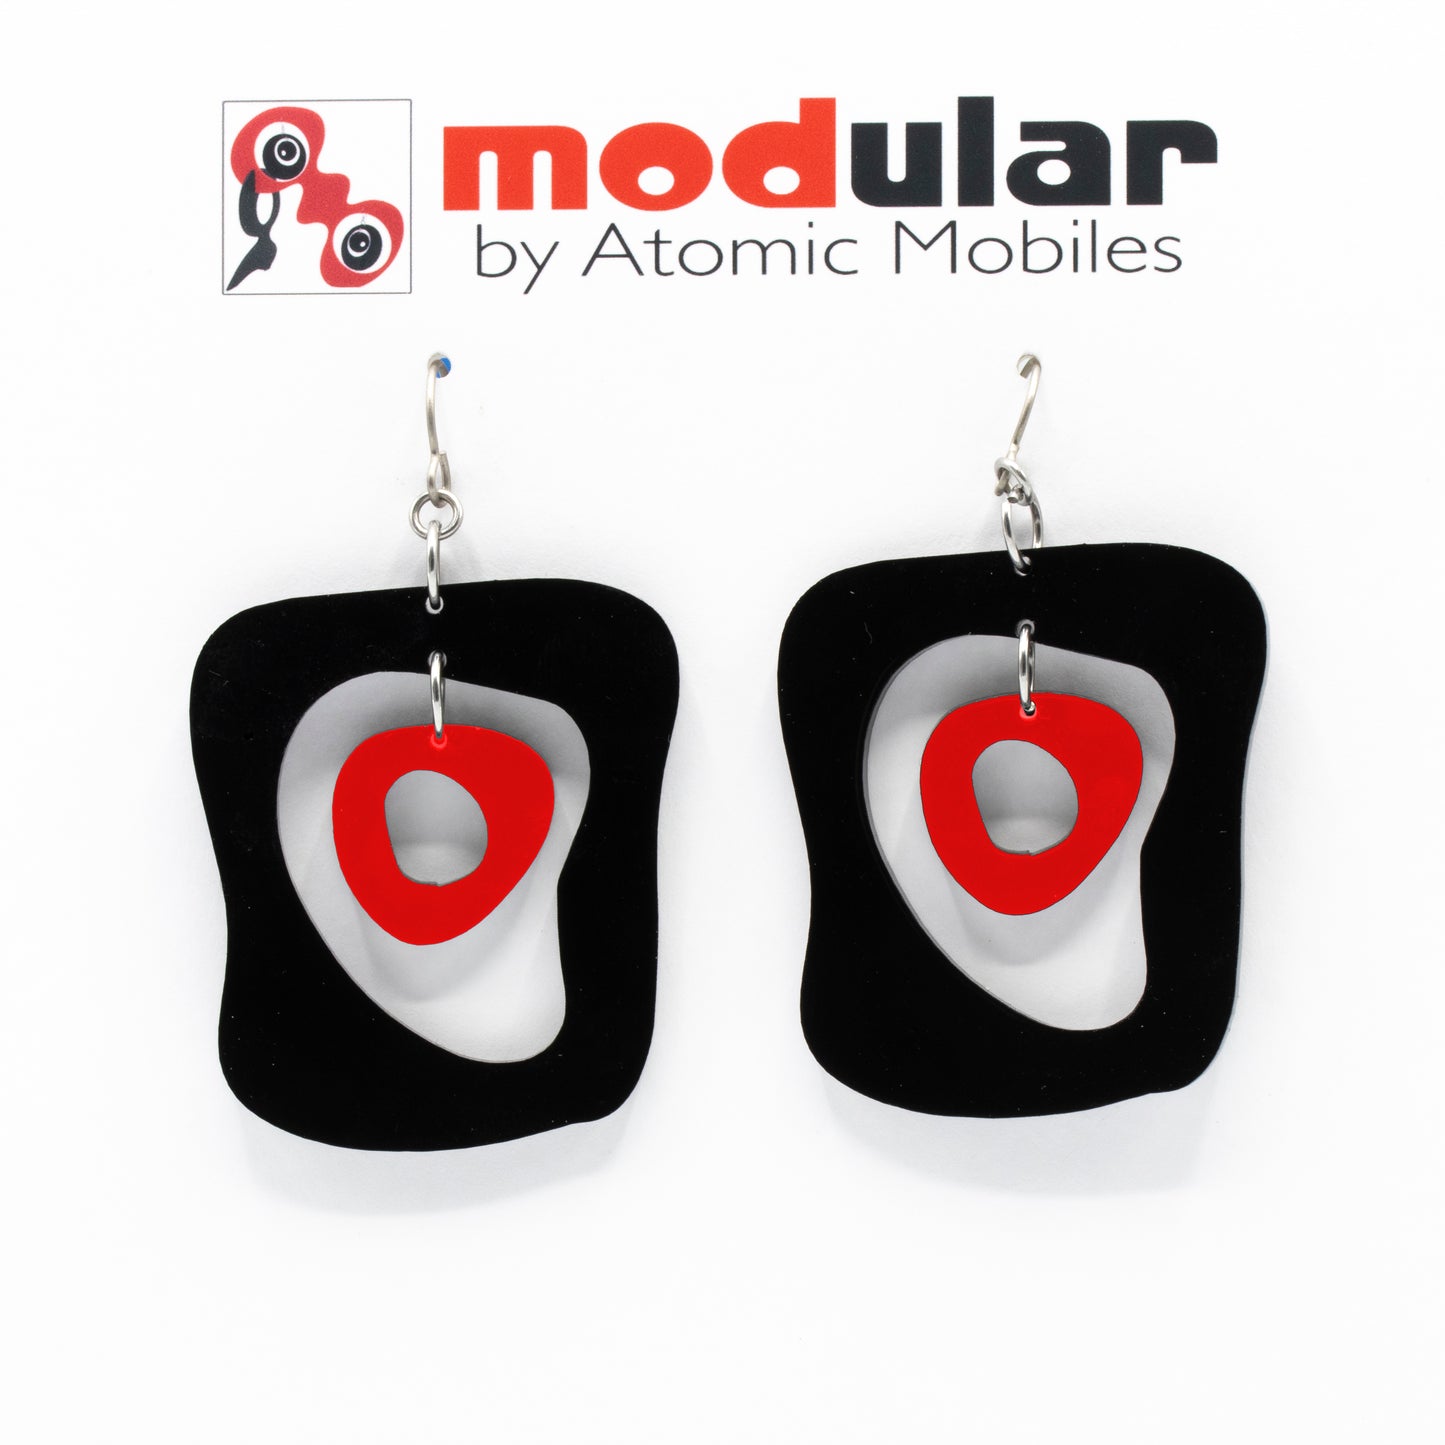 MODular Earrings - Mid Mod Statement Earrings in Black and Red by AtomicMobiles.com - mid century inspired modern art dangle earrings